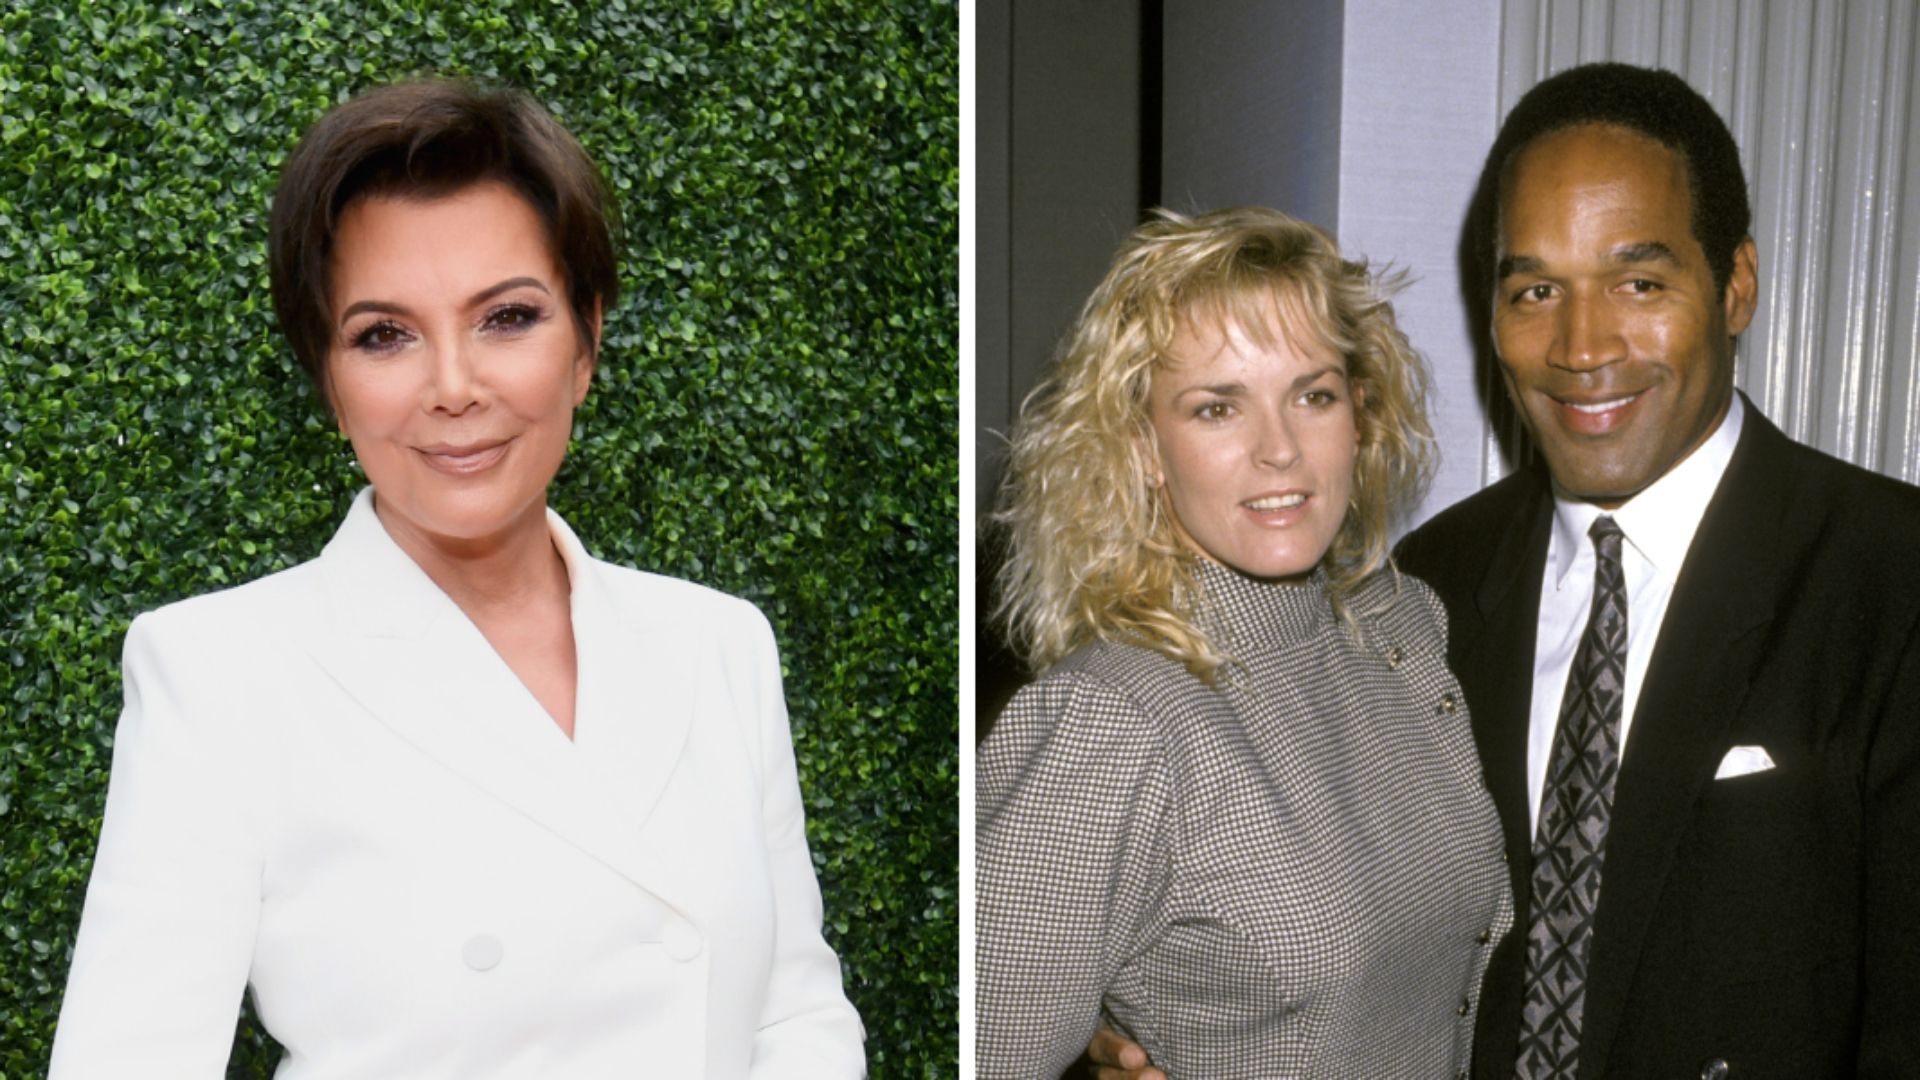 Inside O.J. Simpson's complicated relationship with the Kardashians: from Khloé to Kris and Caitlyn Jenner